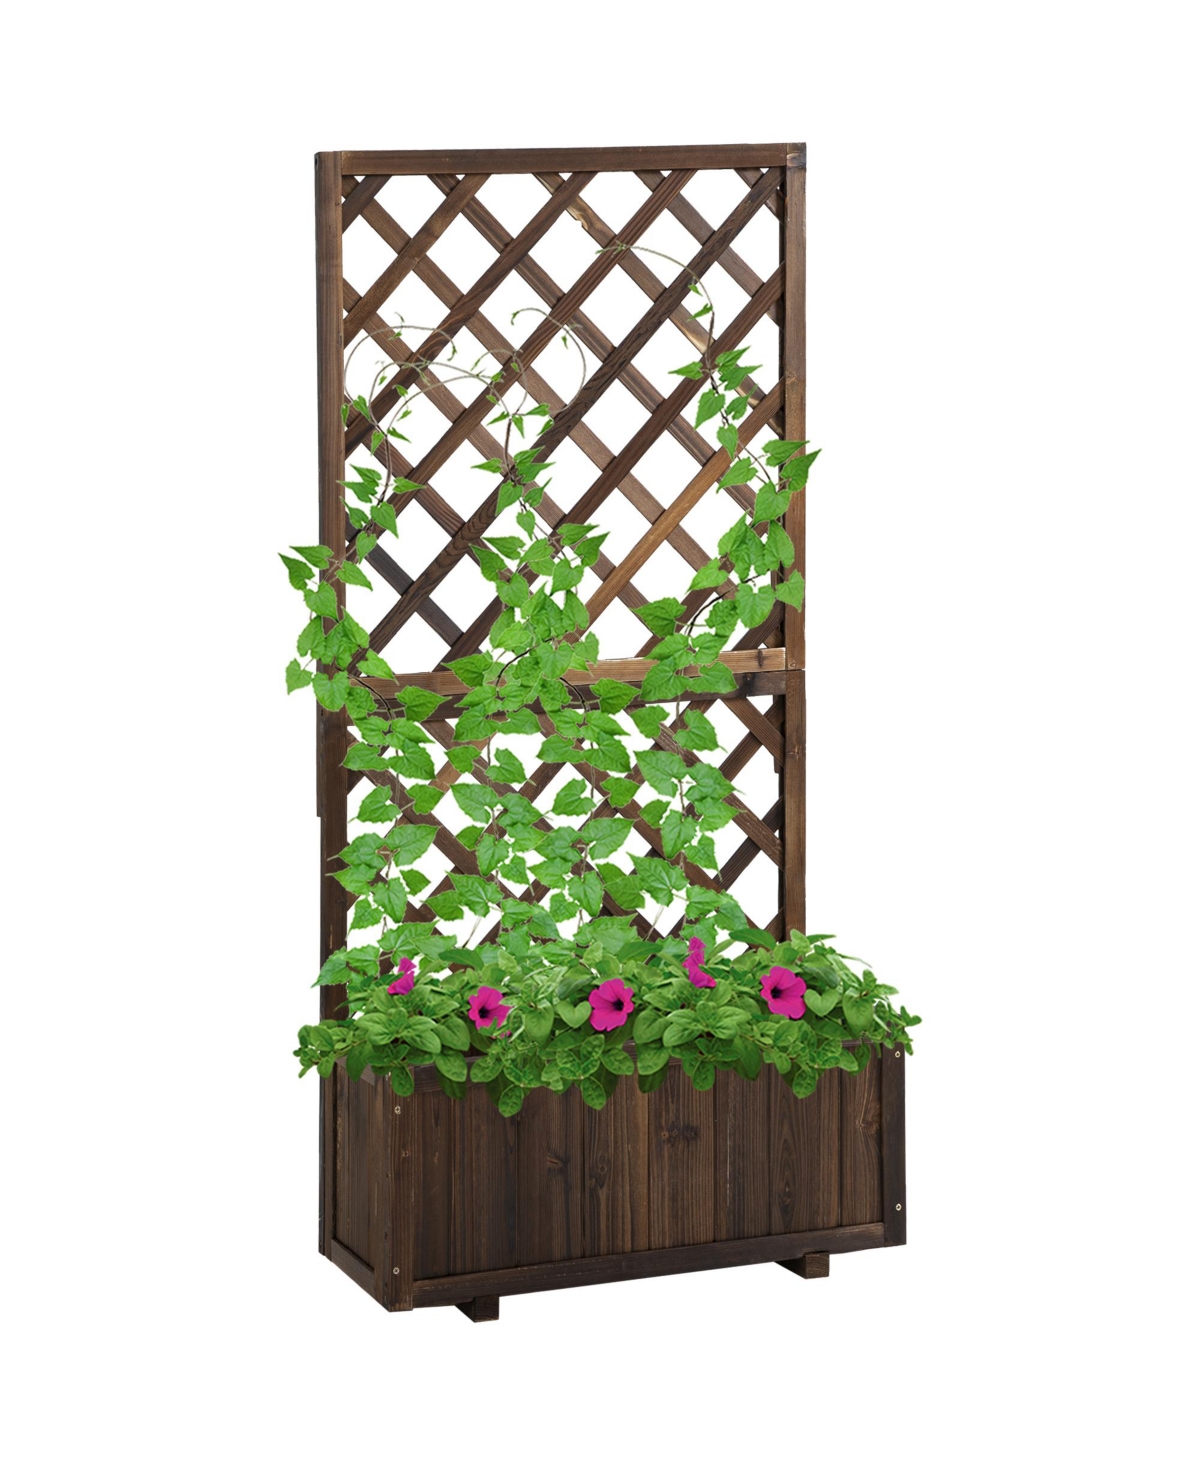 Wooden Raised Garden Bed with Trellis and Drain Holes, Brown - Brown